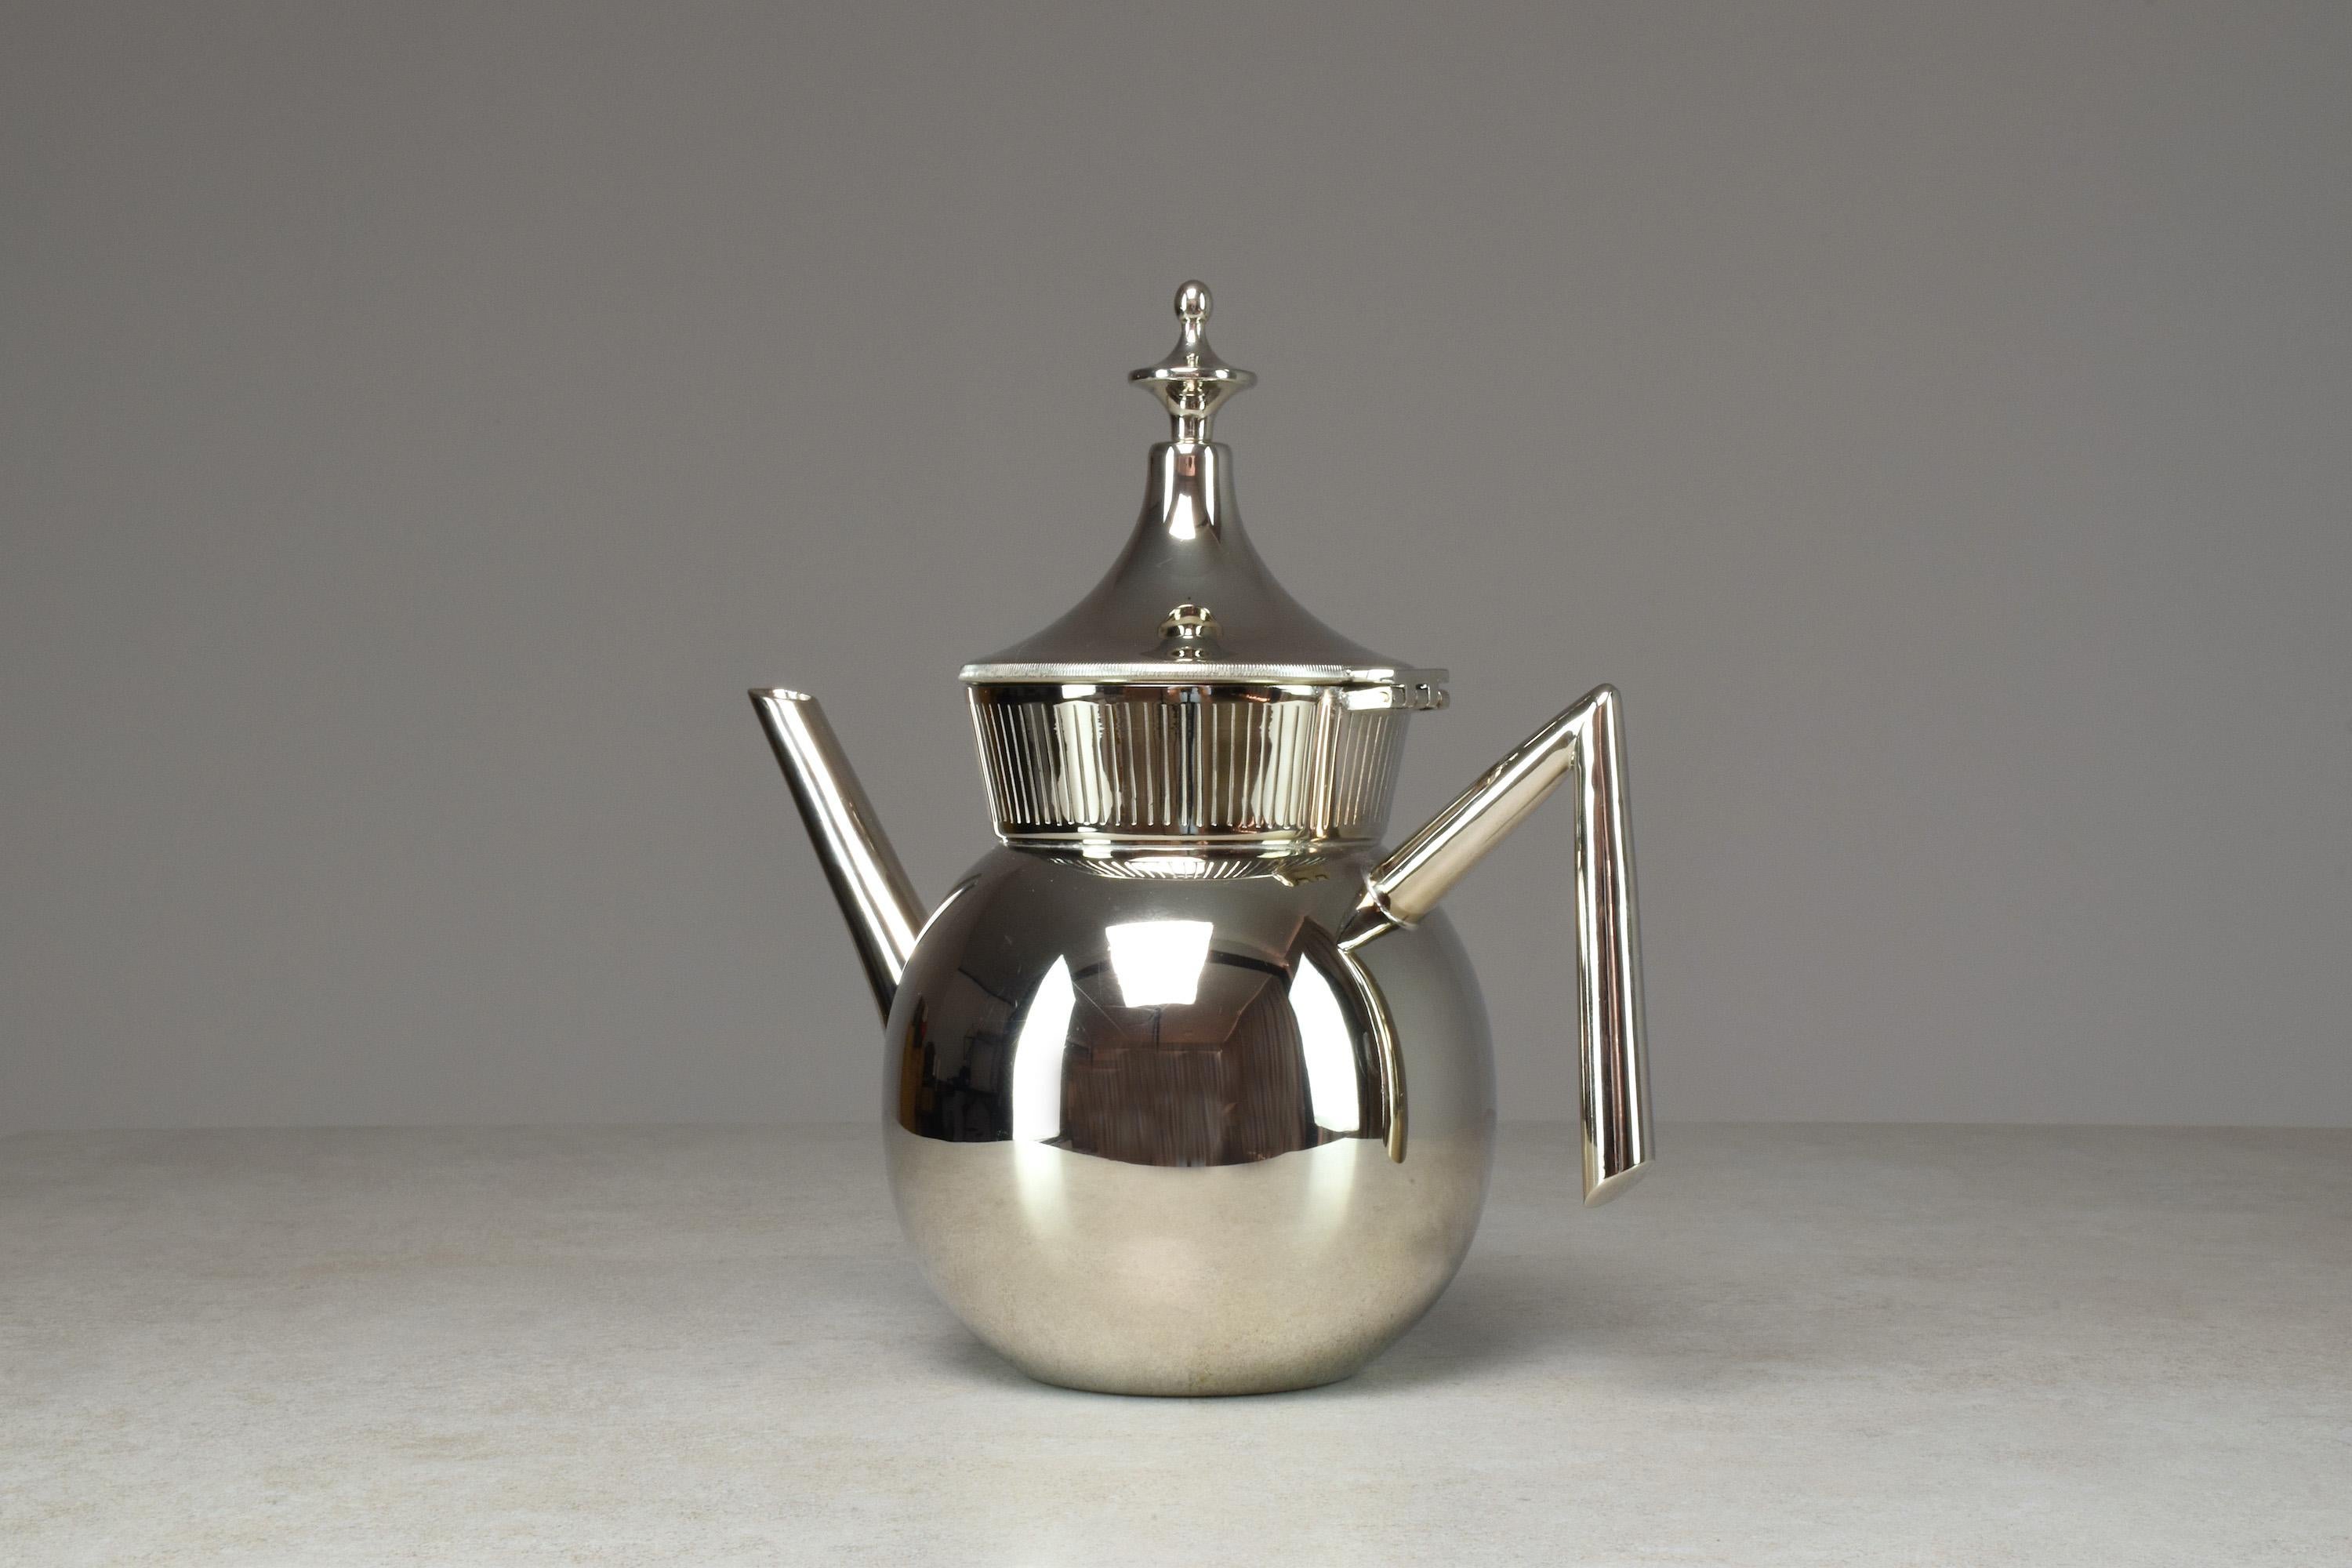 Modern Almis-M Contemporary Moroccan Teapot by Jonathan Amar